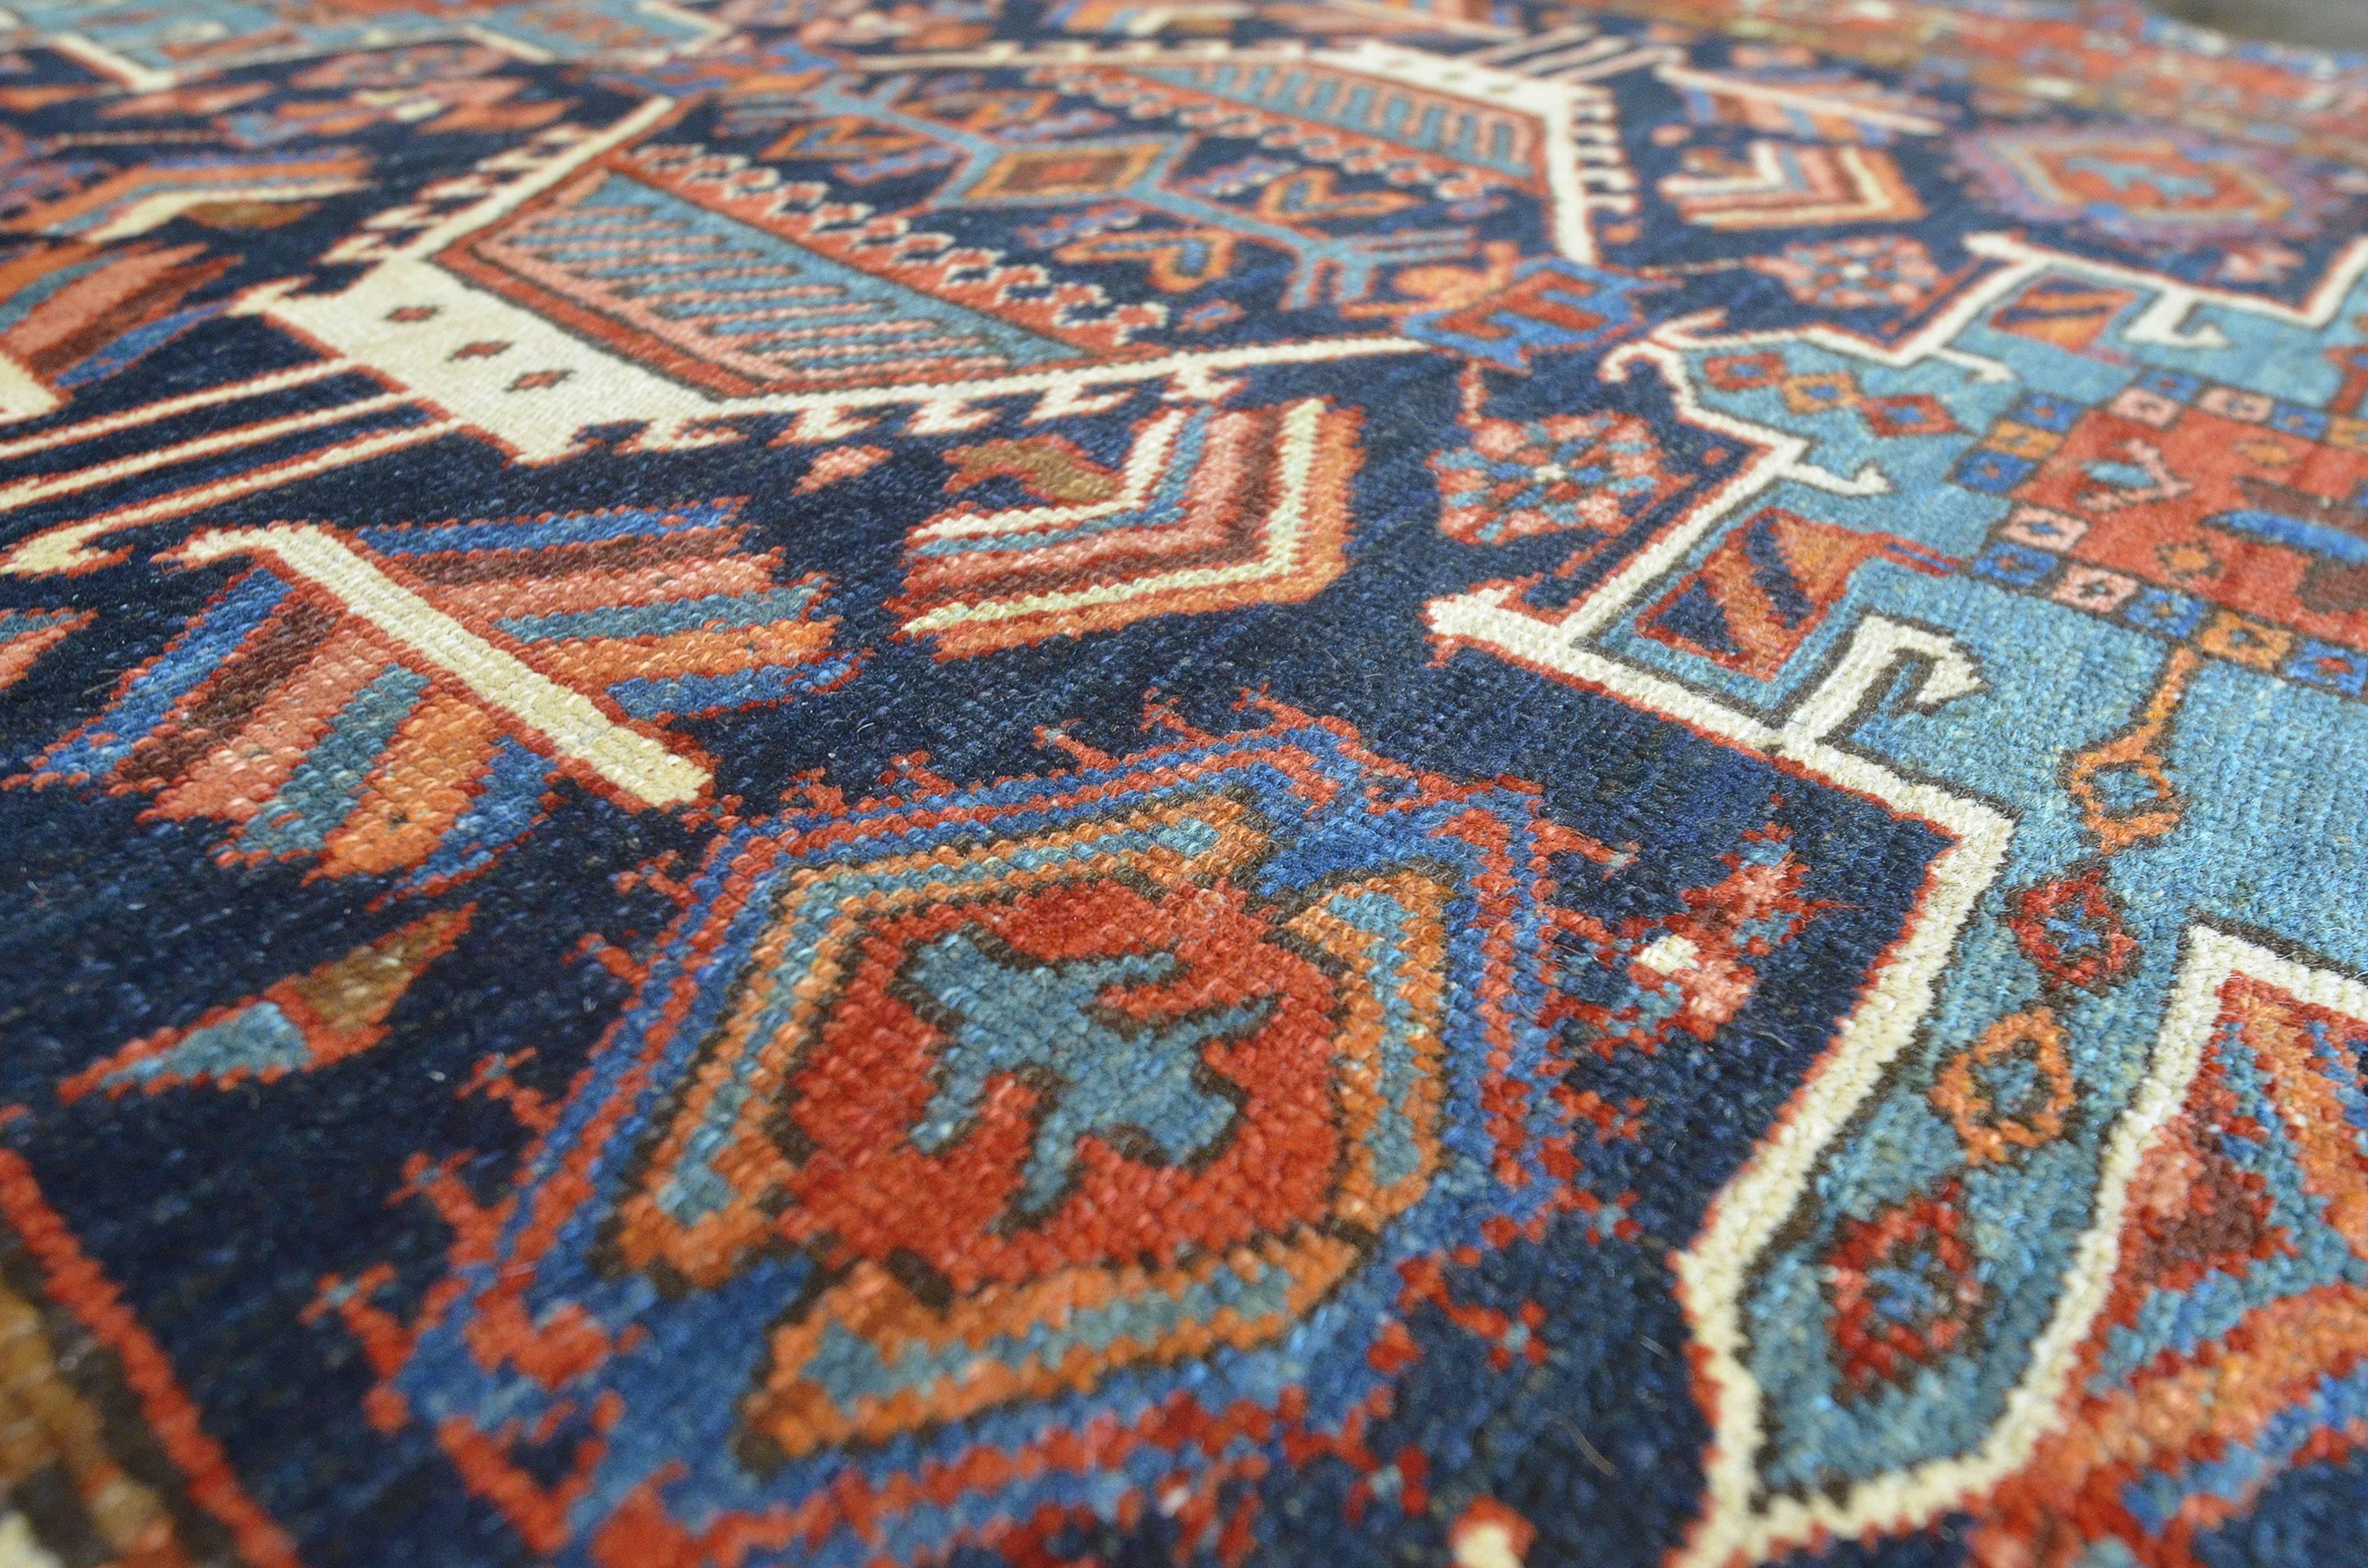 Vibrant Antique Late 19th Century Serapi Persian Rug In Good Condition For Sale In West Hollywood, CA